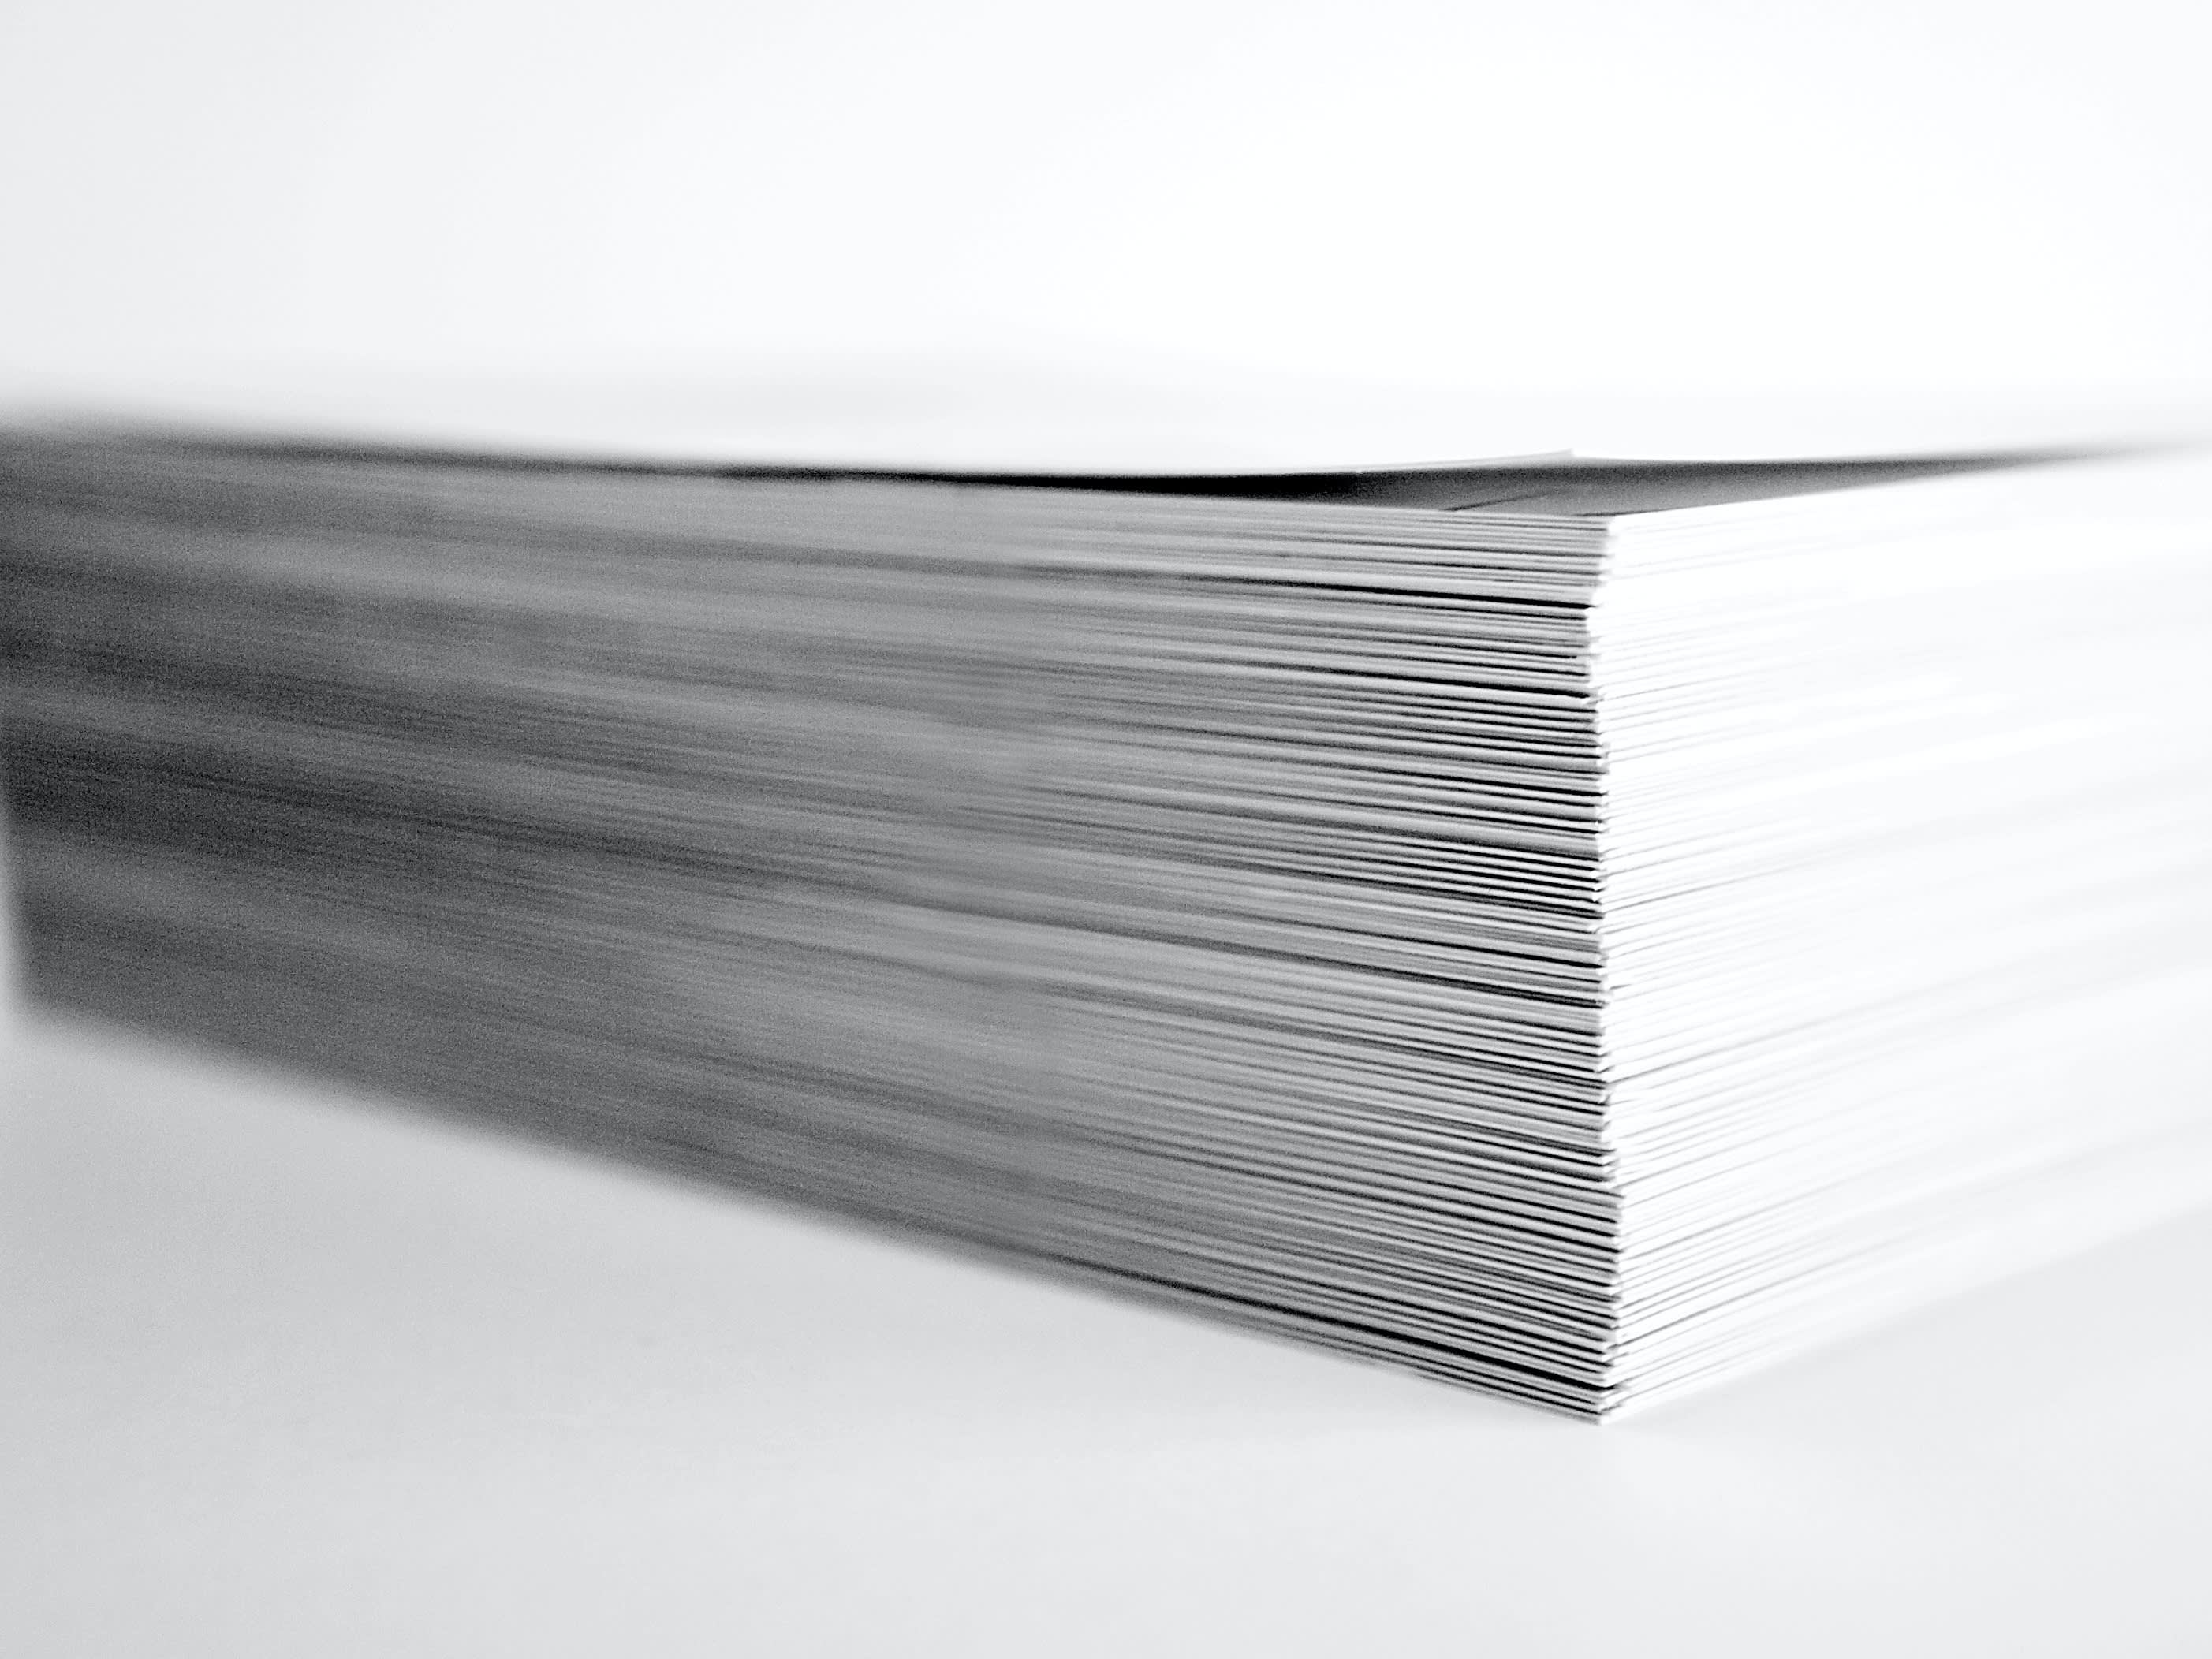 A black and white image of a pile of documents 